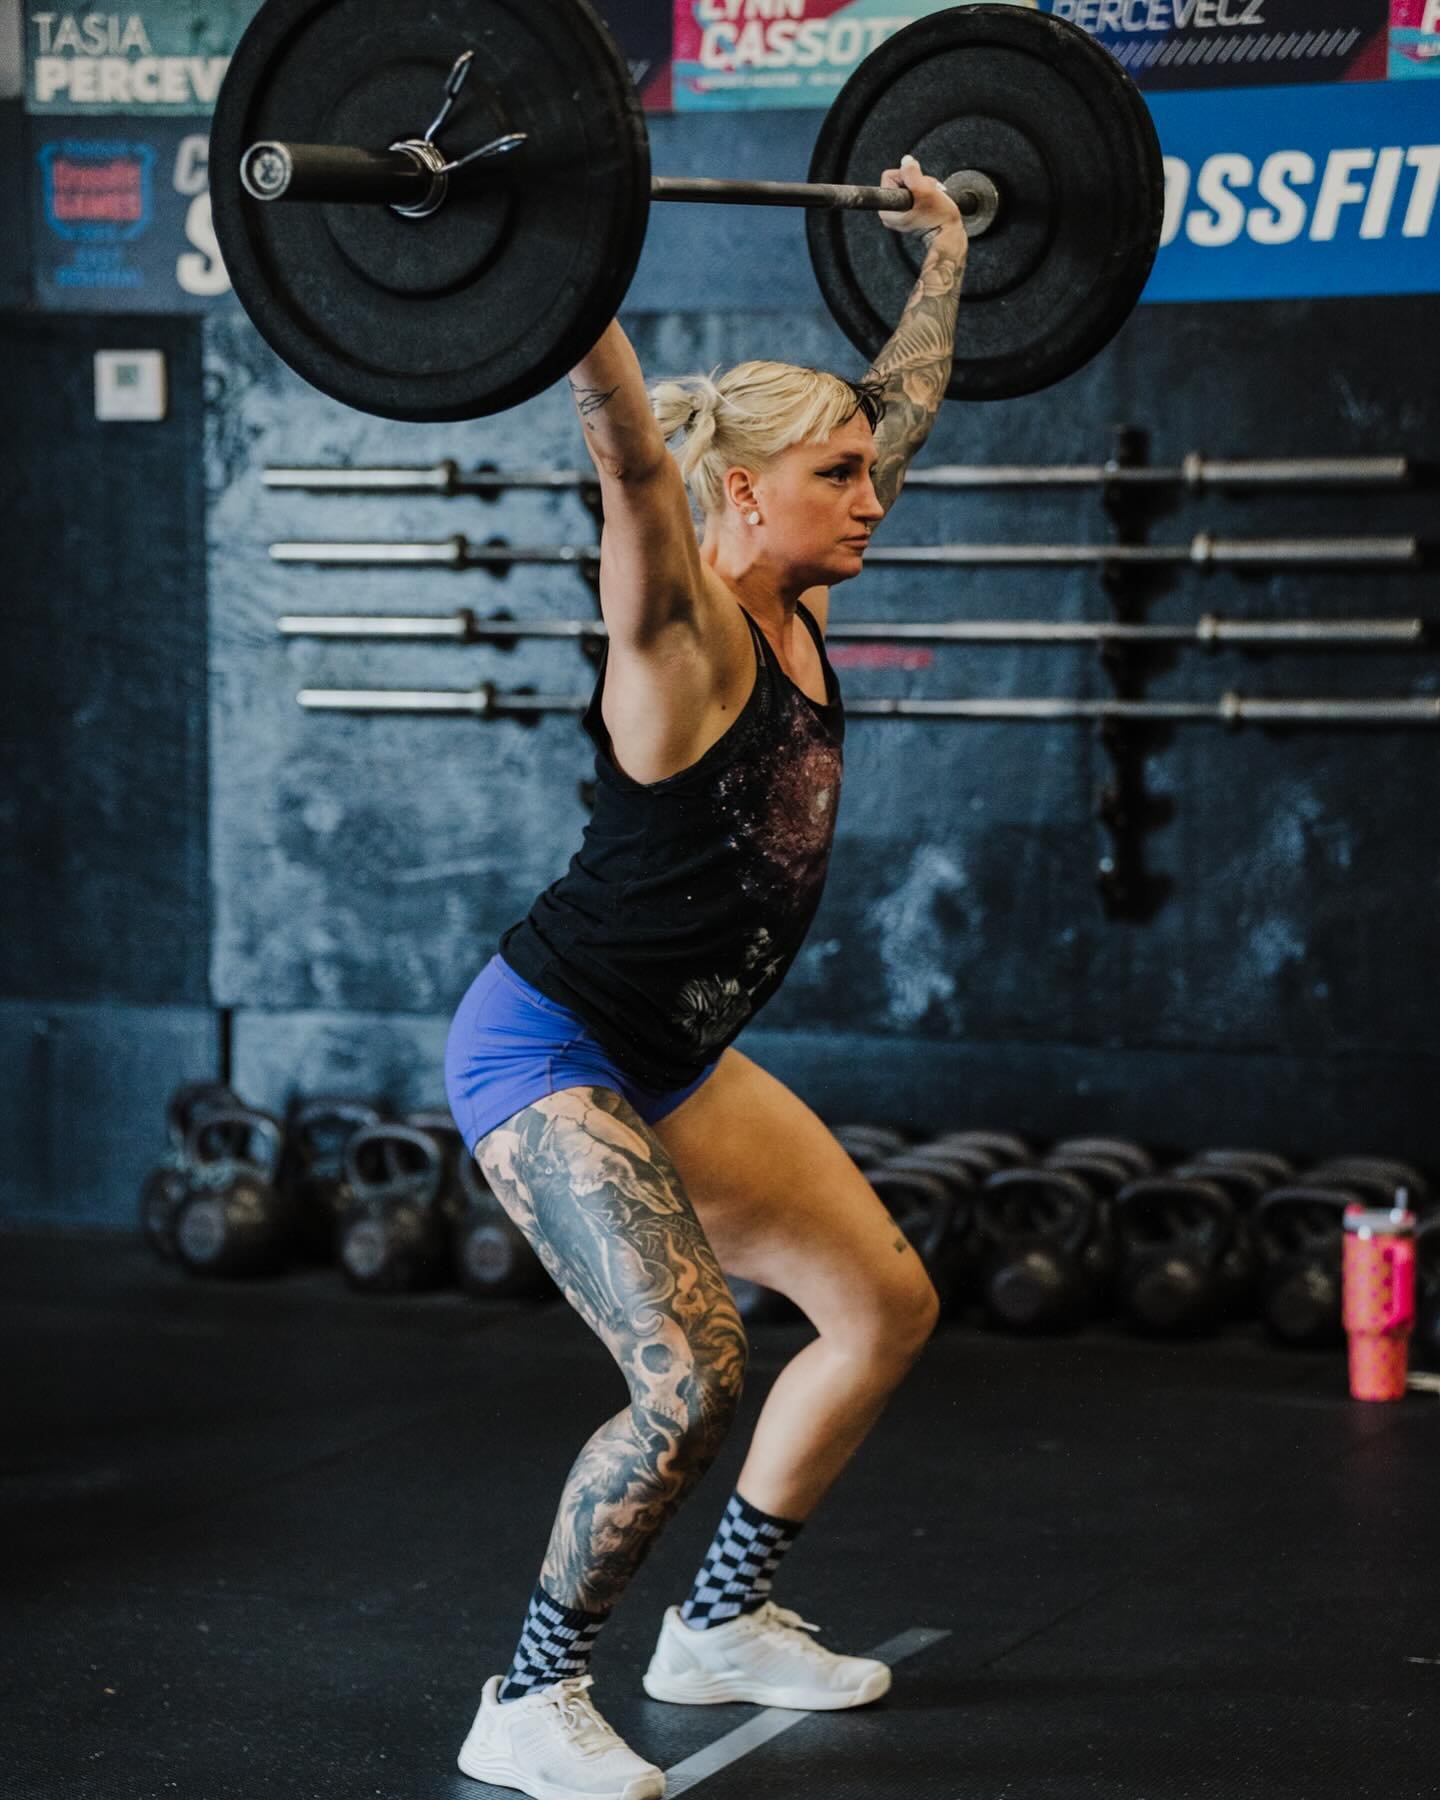 Tuesday strength/power brought to you by our PEAK program⚡️

A. 5 alternating sets:

A1. 5 hang power snatches

A2. 2-3 seated box jumps

A3. 10 banded squat jumps

📸 @tabathaskeltonphoto